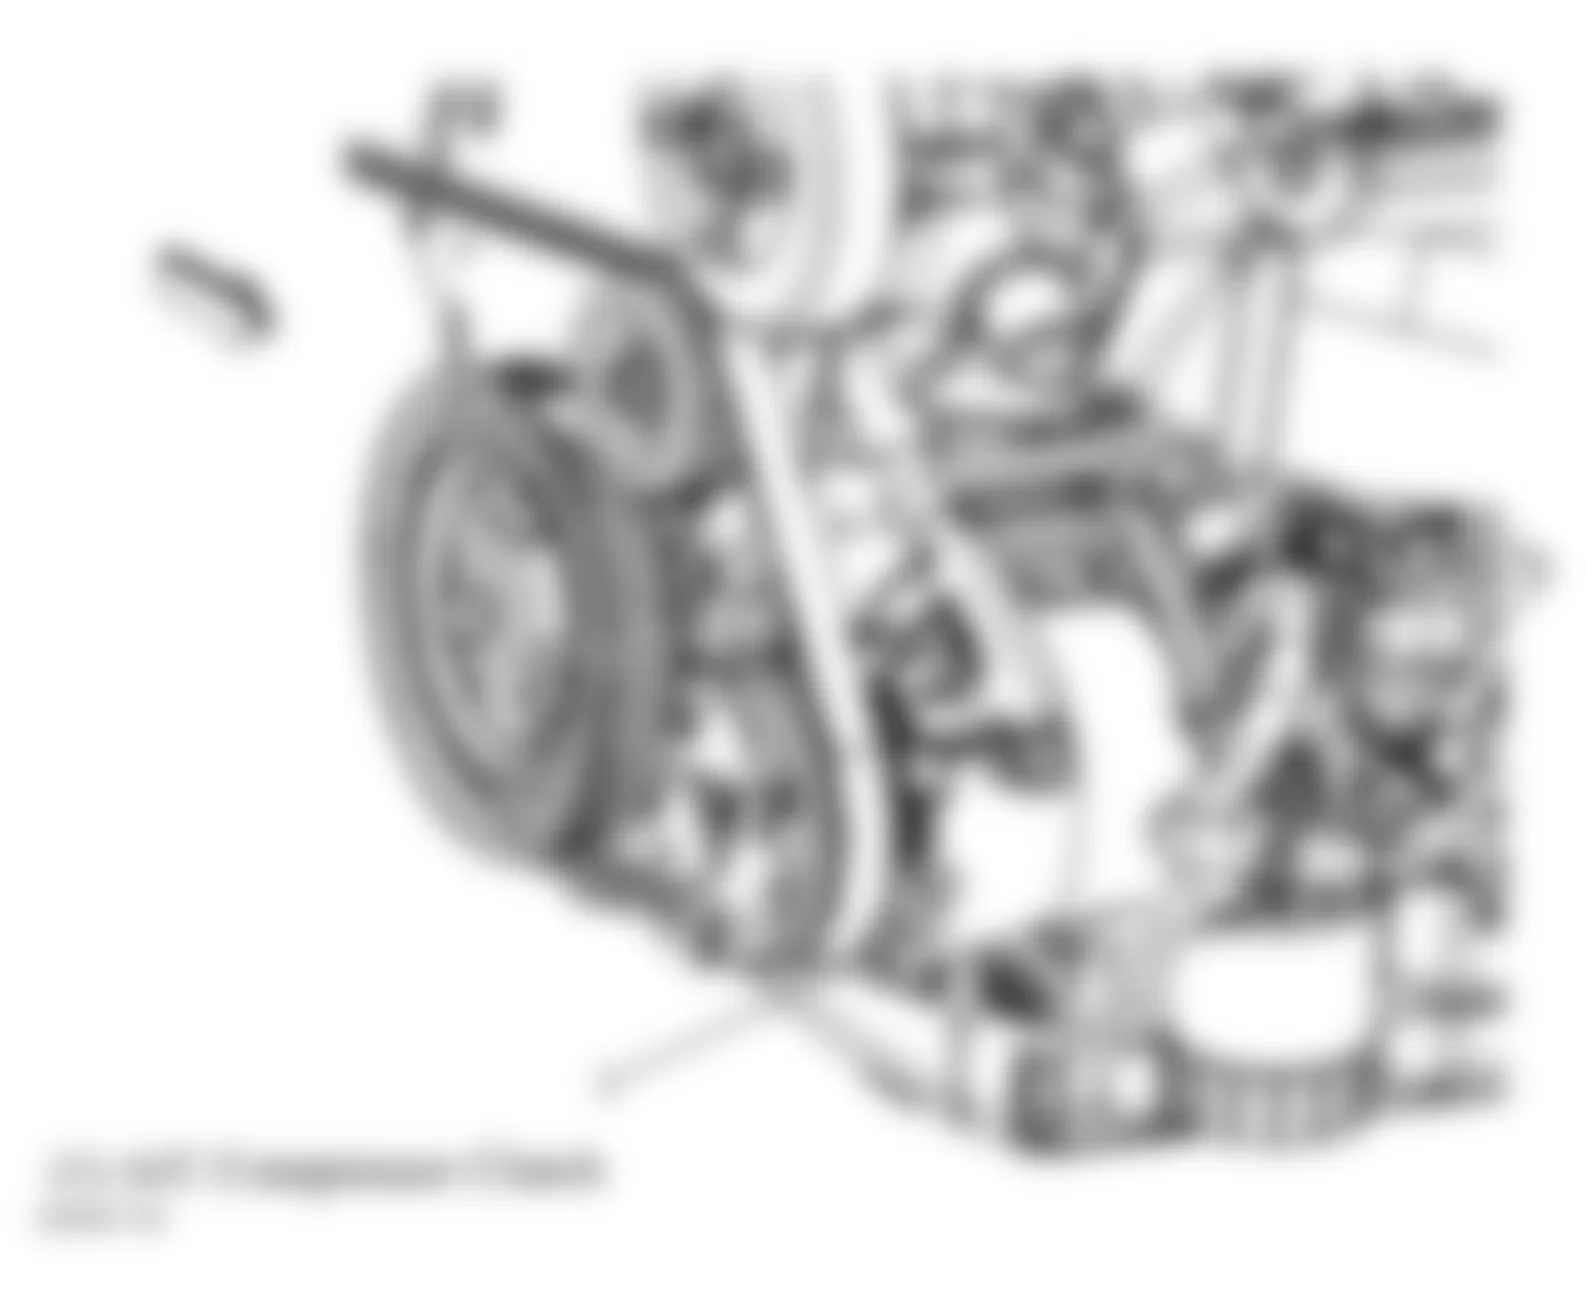 Chevrolet Malibu Classic LT 2008 - Component Locations -  Lower Right Front Of Engine (3.5L)